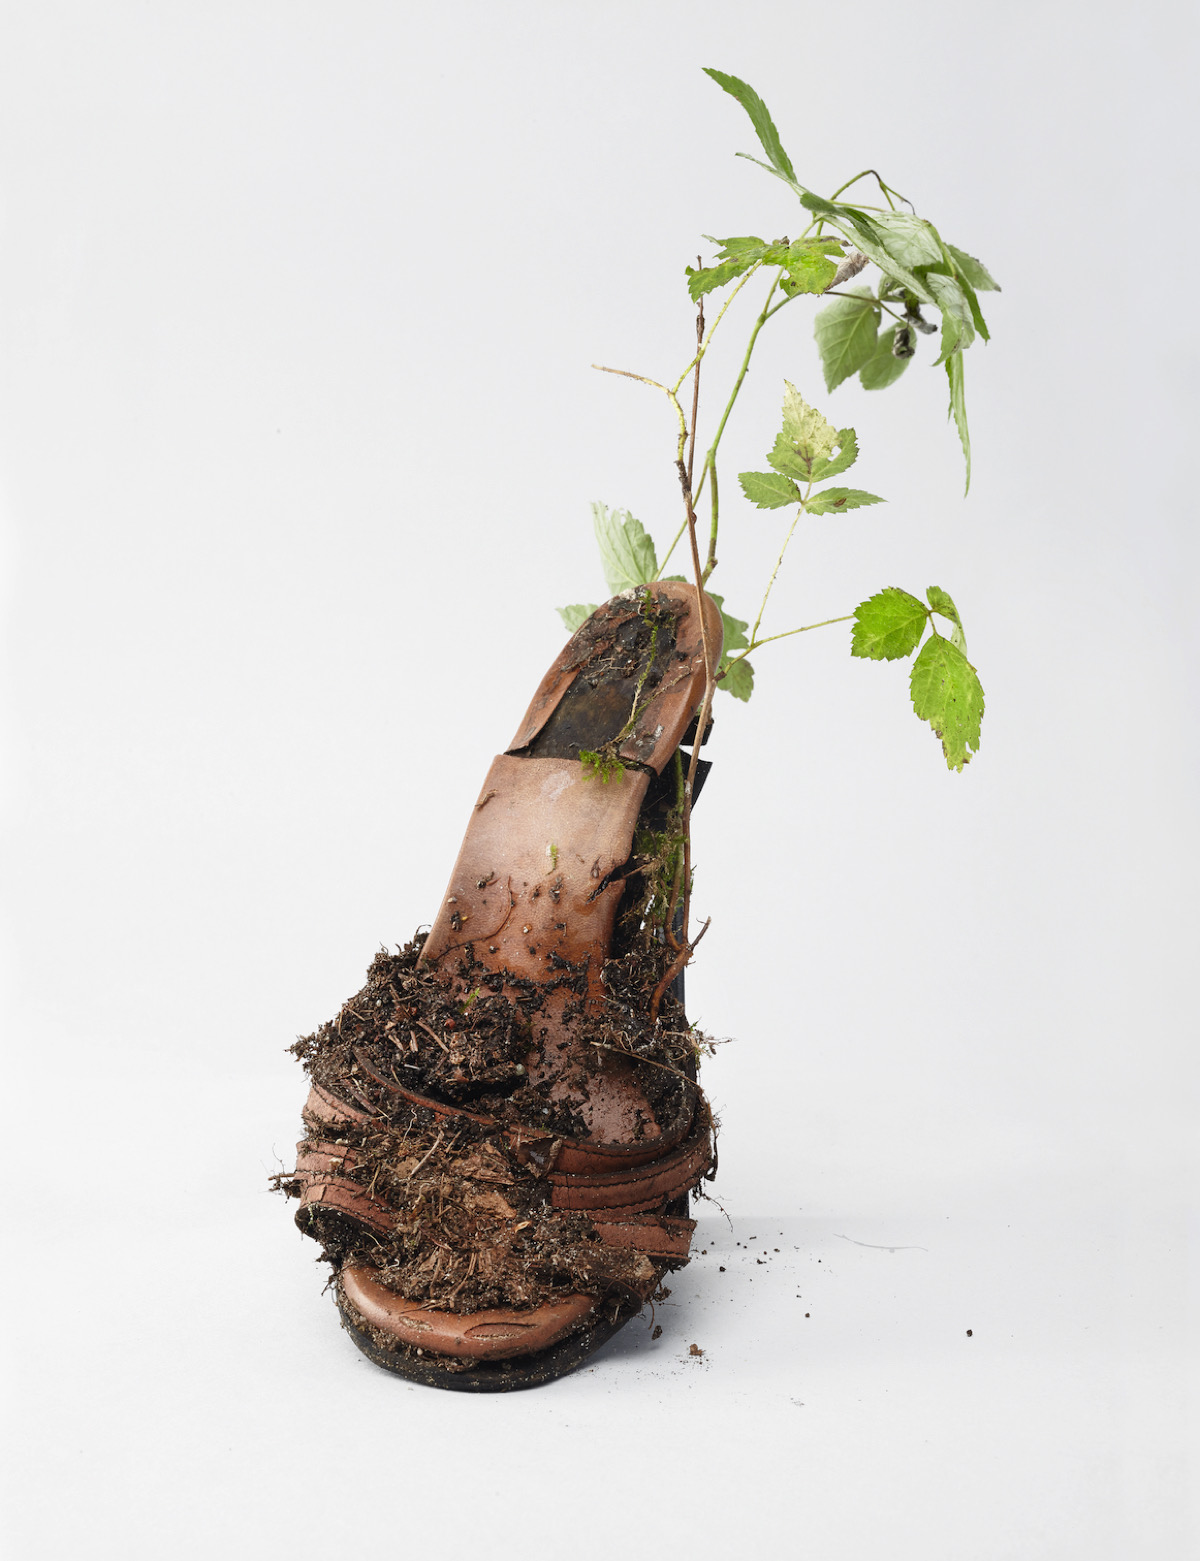 Diana Lelonek, from the series Center for living things, copyright Diana Lelonek